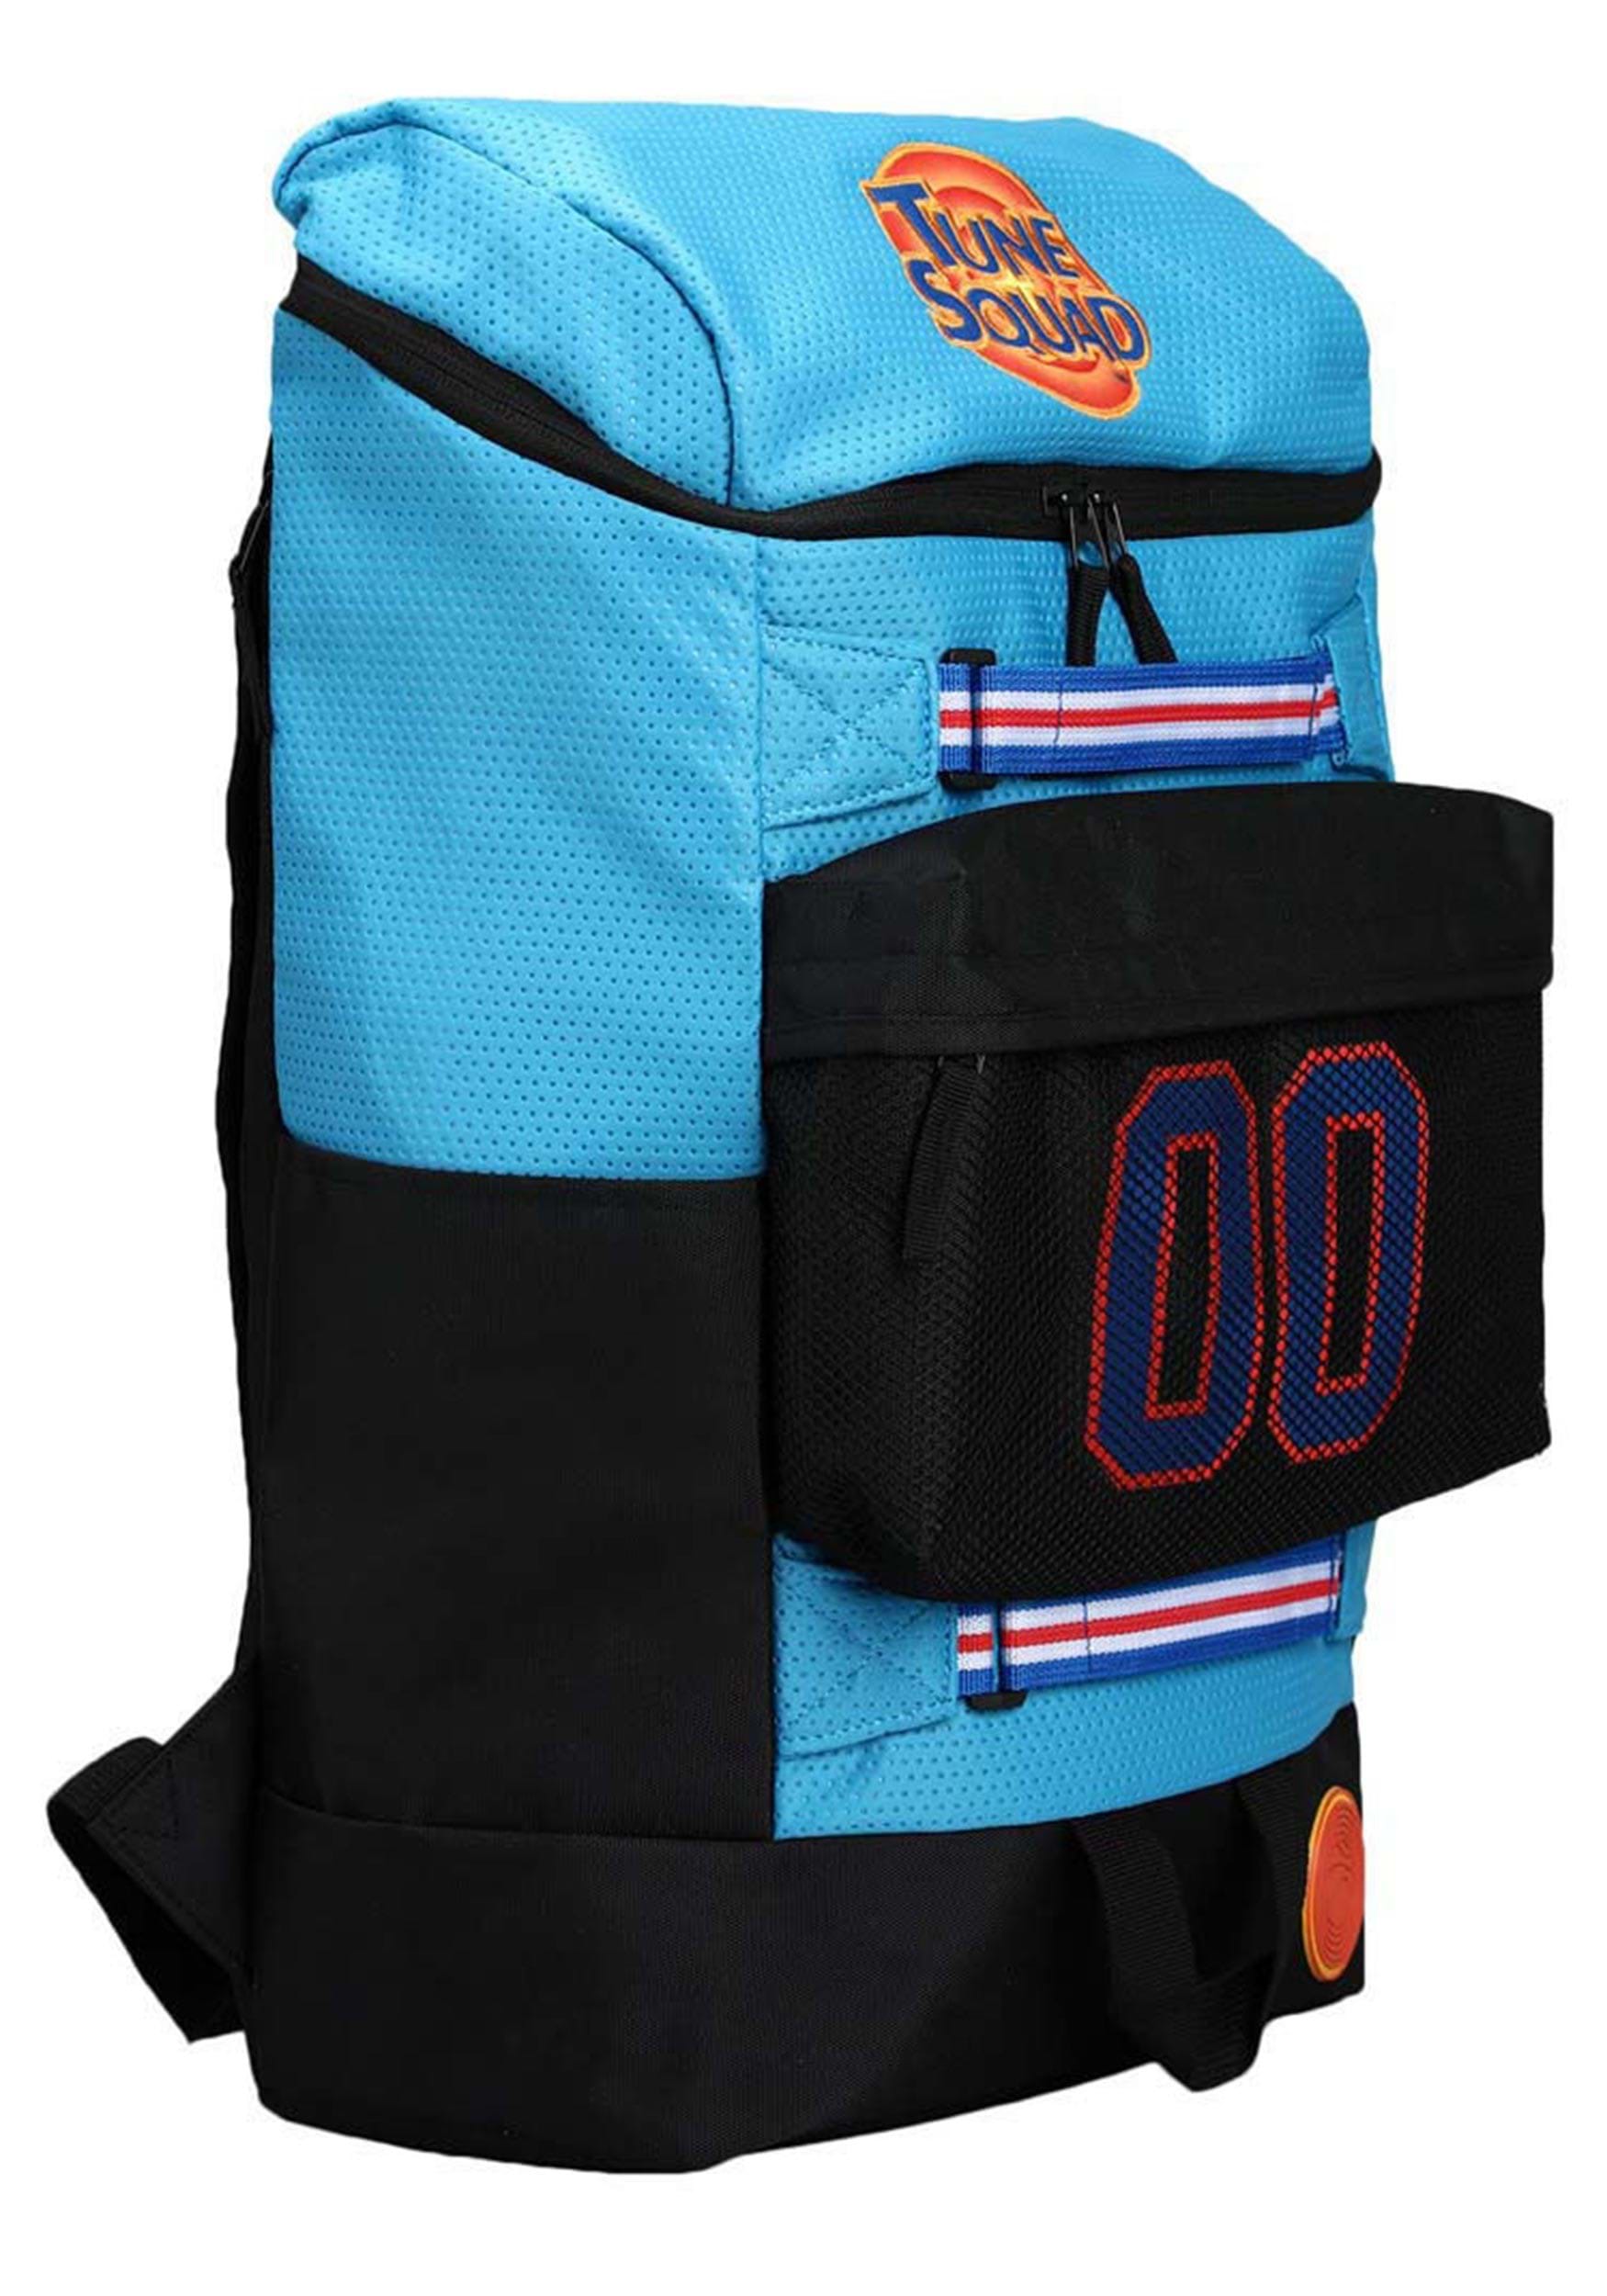 Backpack Of Space Jam's Tune Squad Jersey , Space Jam Gifts